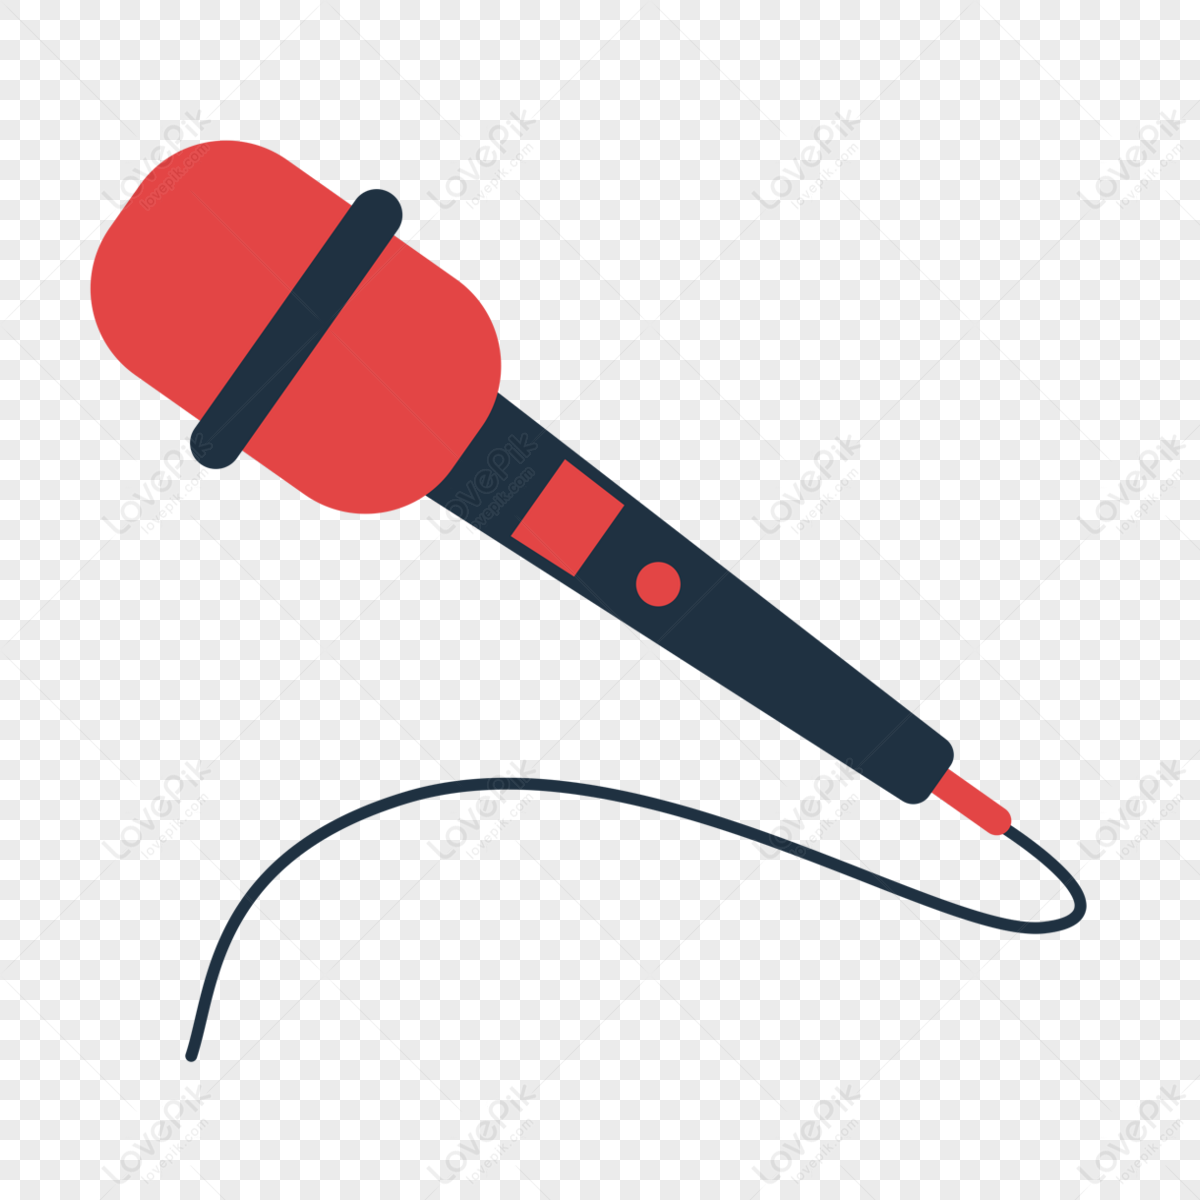 Microphone Stand Png Stock Illustrations – 42 Microphone Stand Png Stock  Illustrations, Vectors & Clipart - Dreamstime